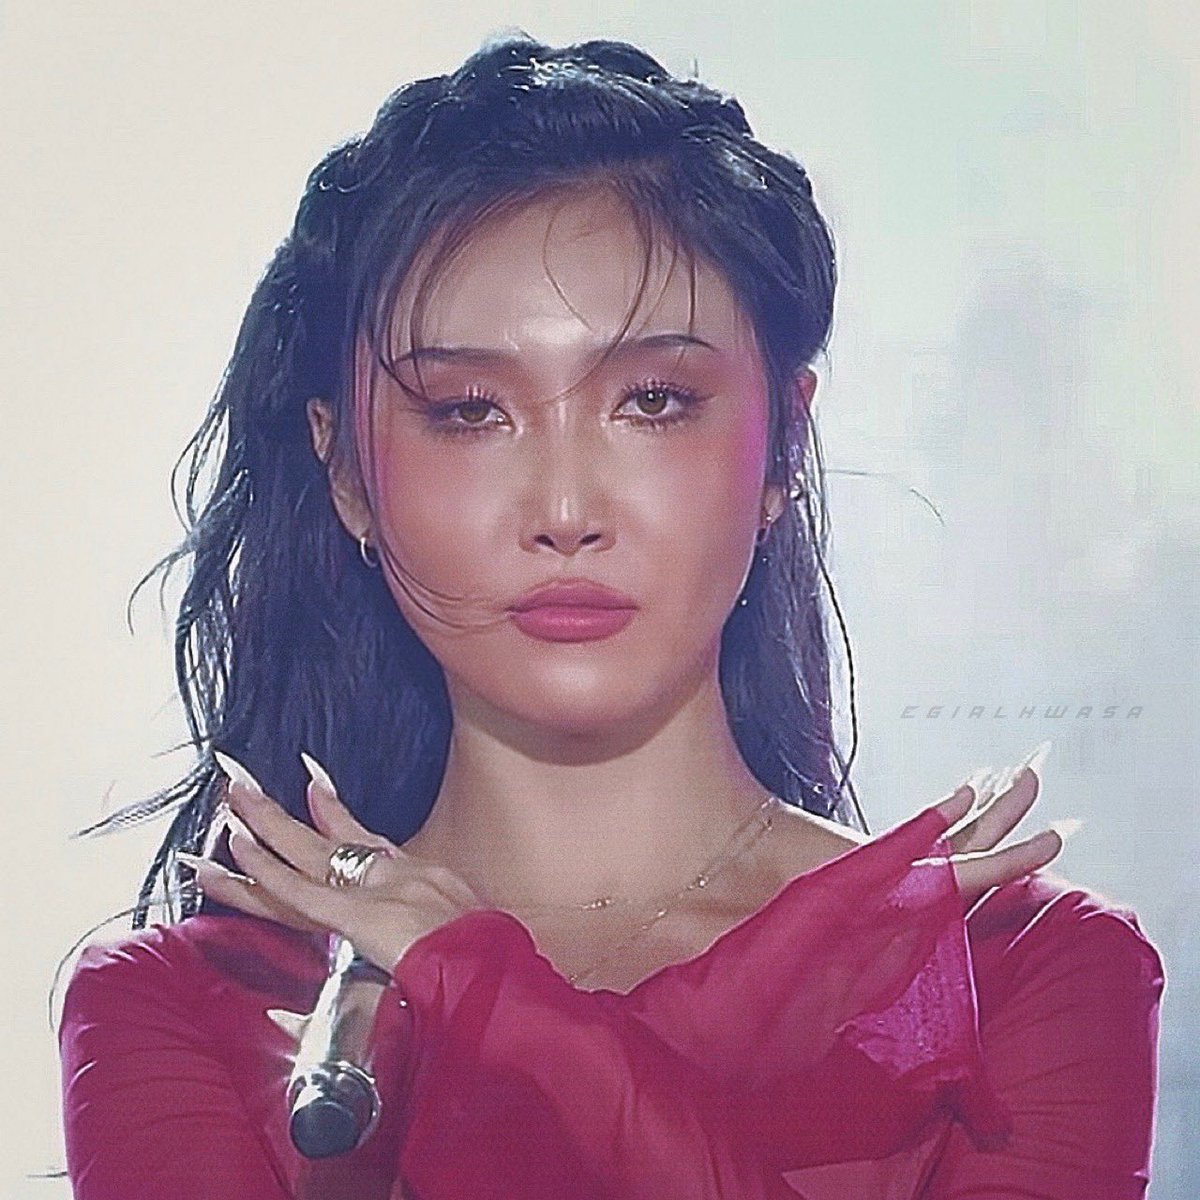 hwasa is a real life, siren